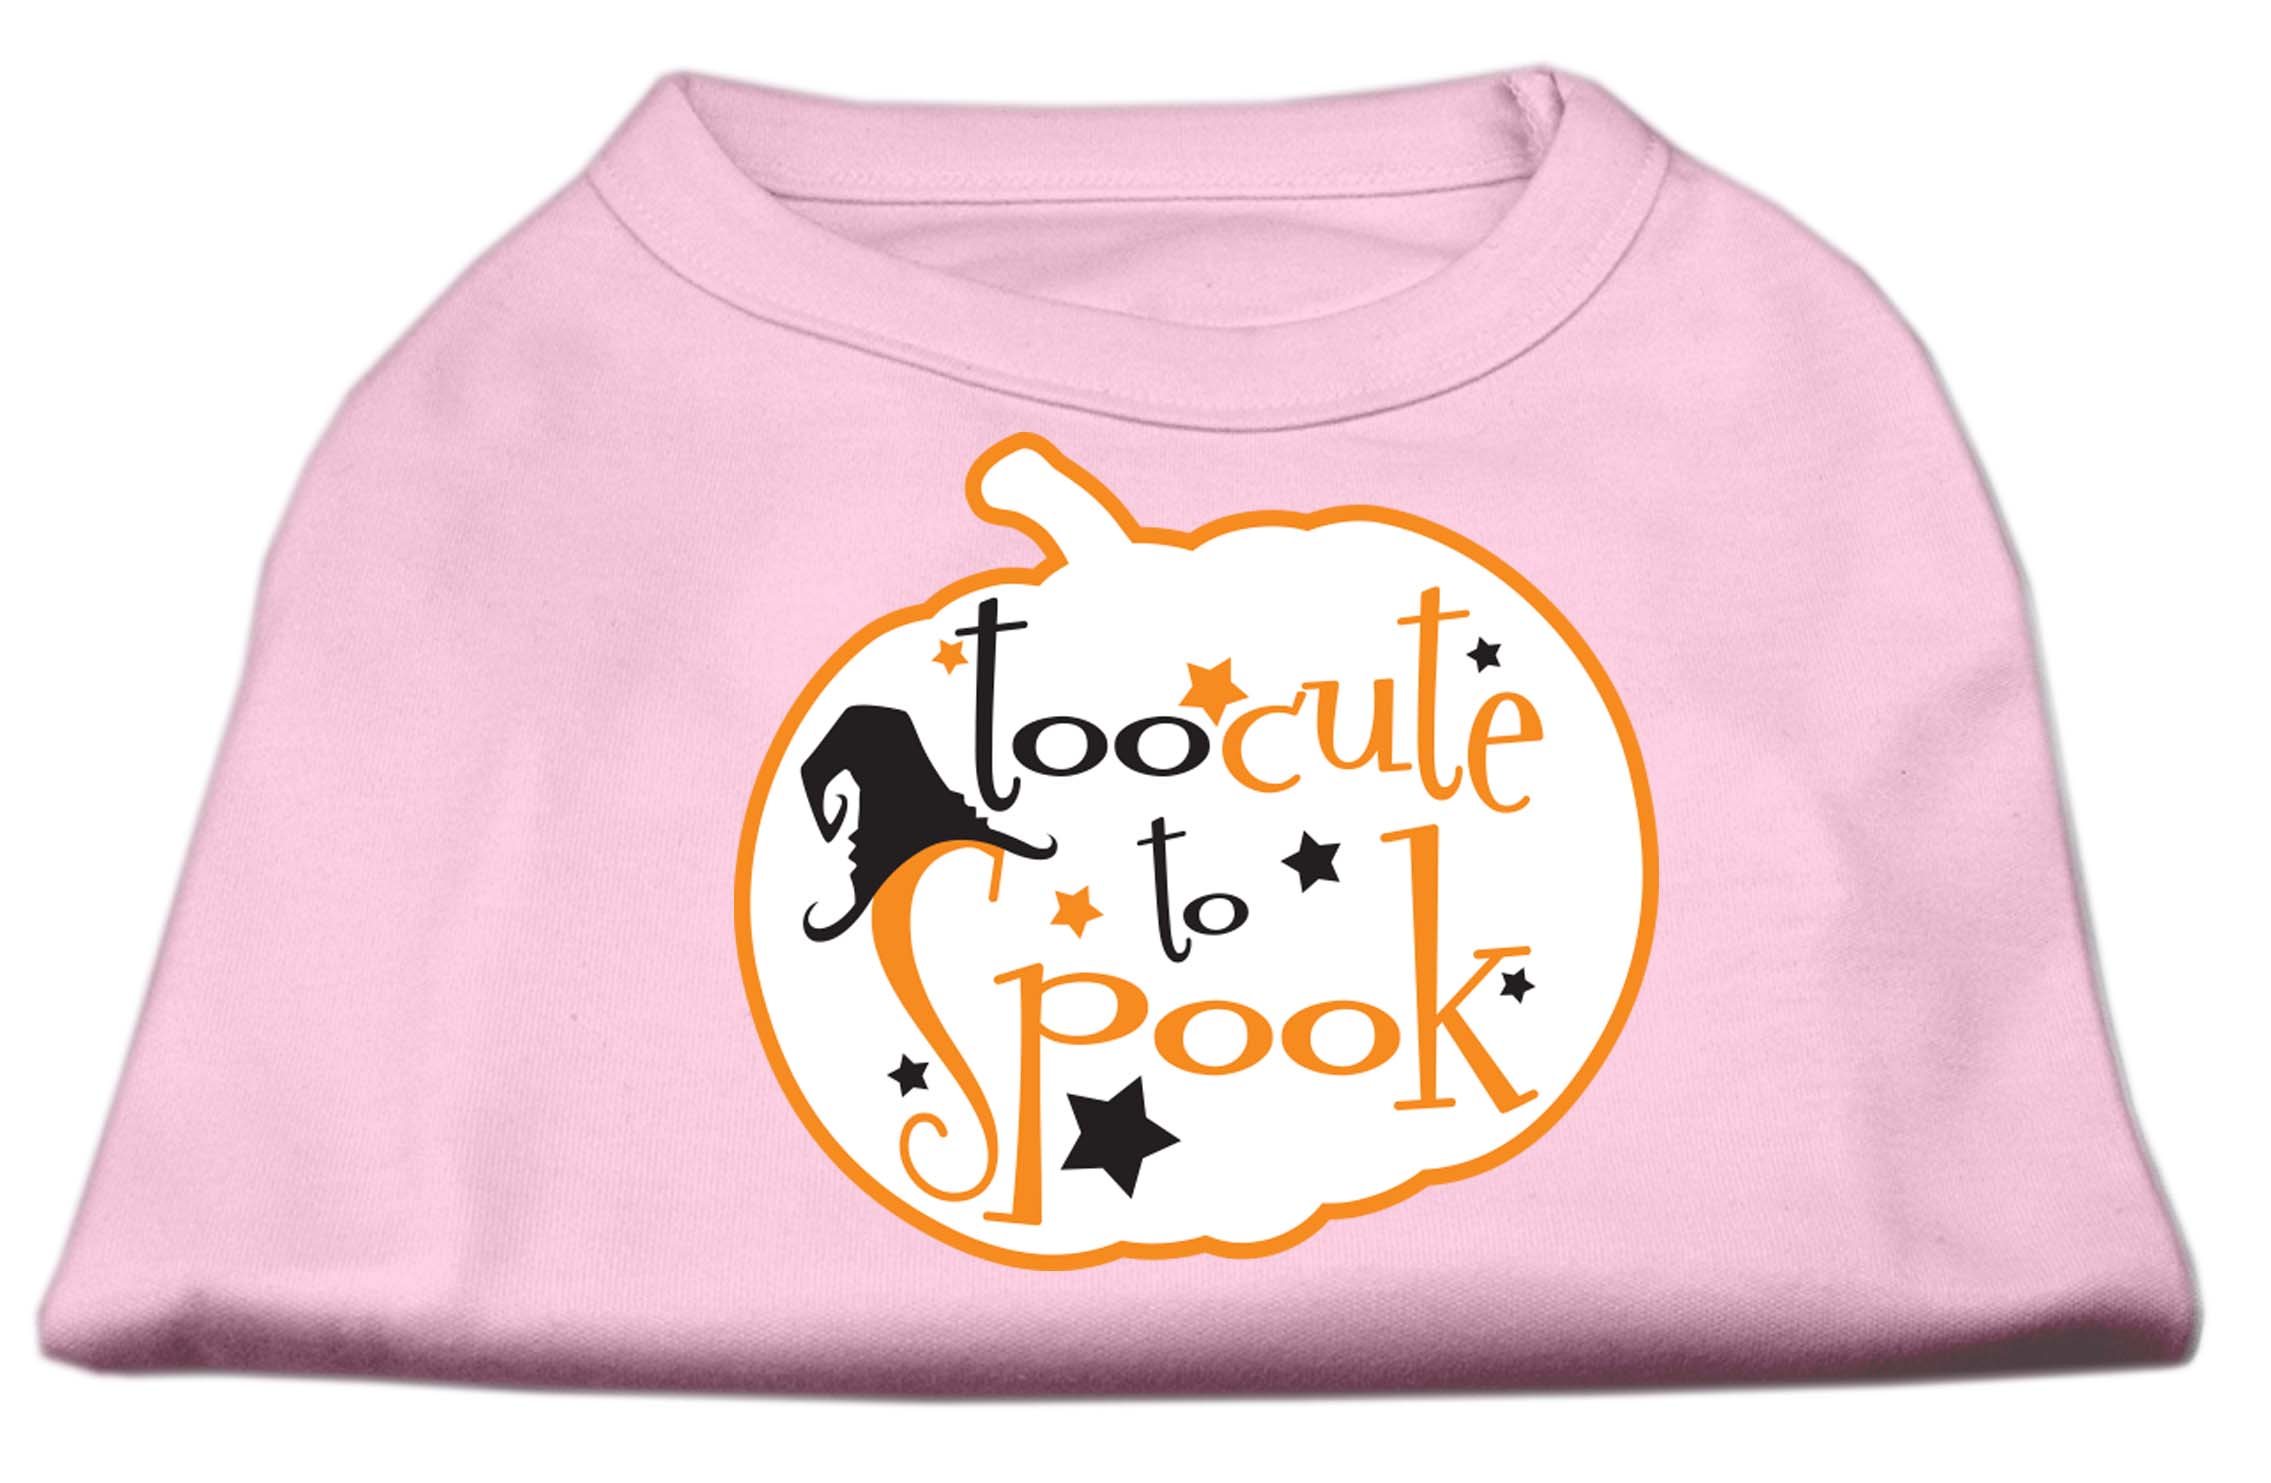 Too Cute to Spook Screen Print Dog Shirt Light Pink Med